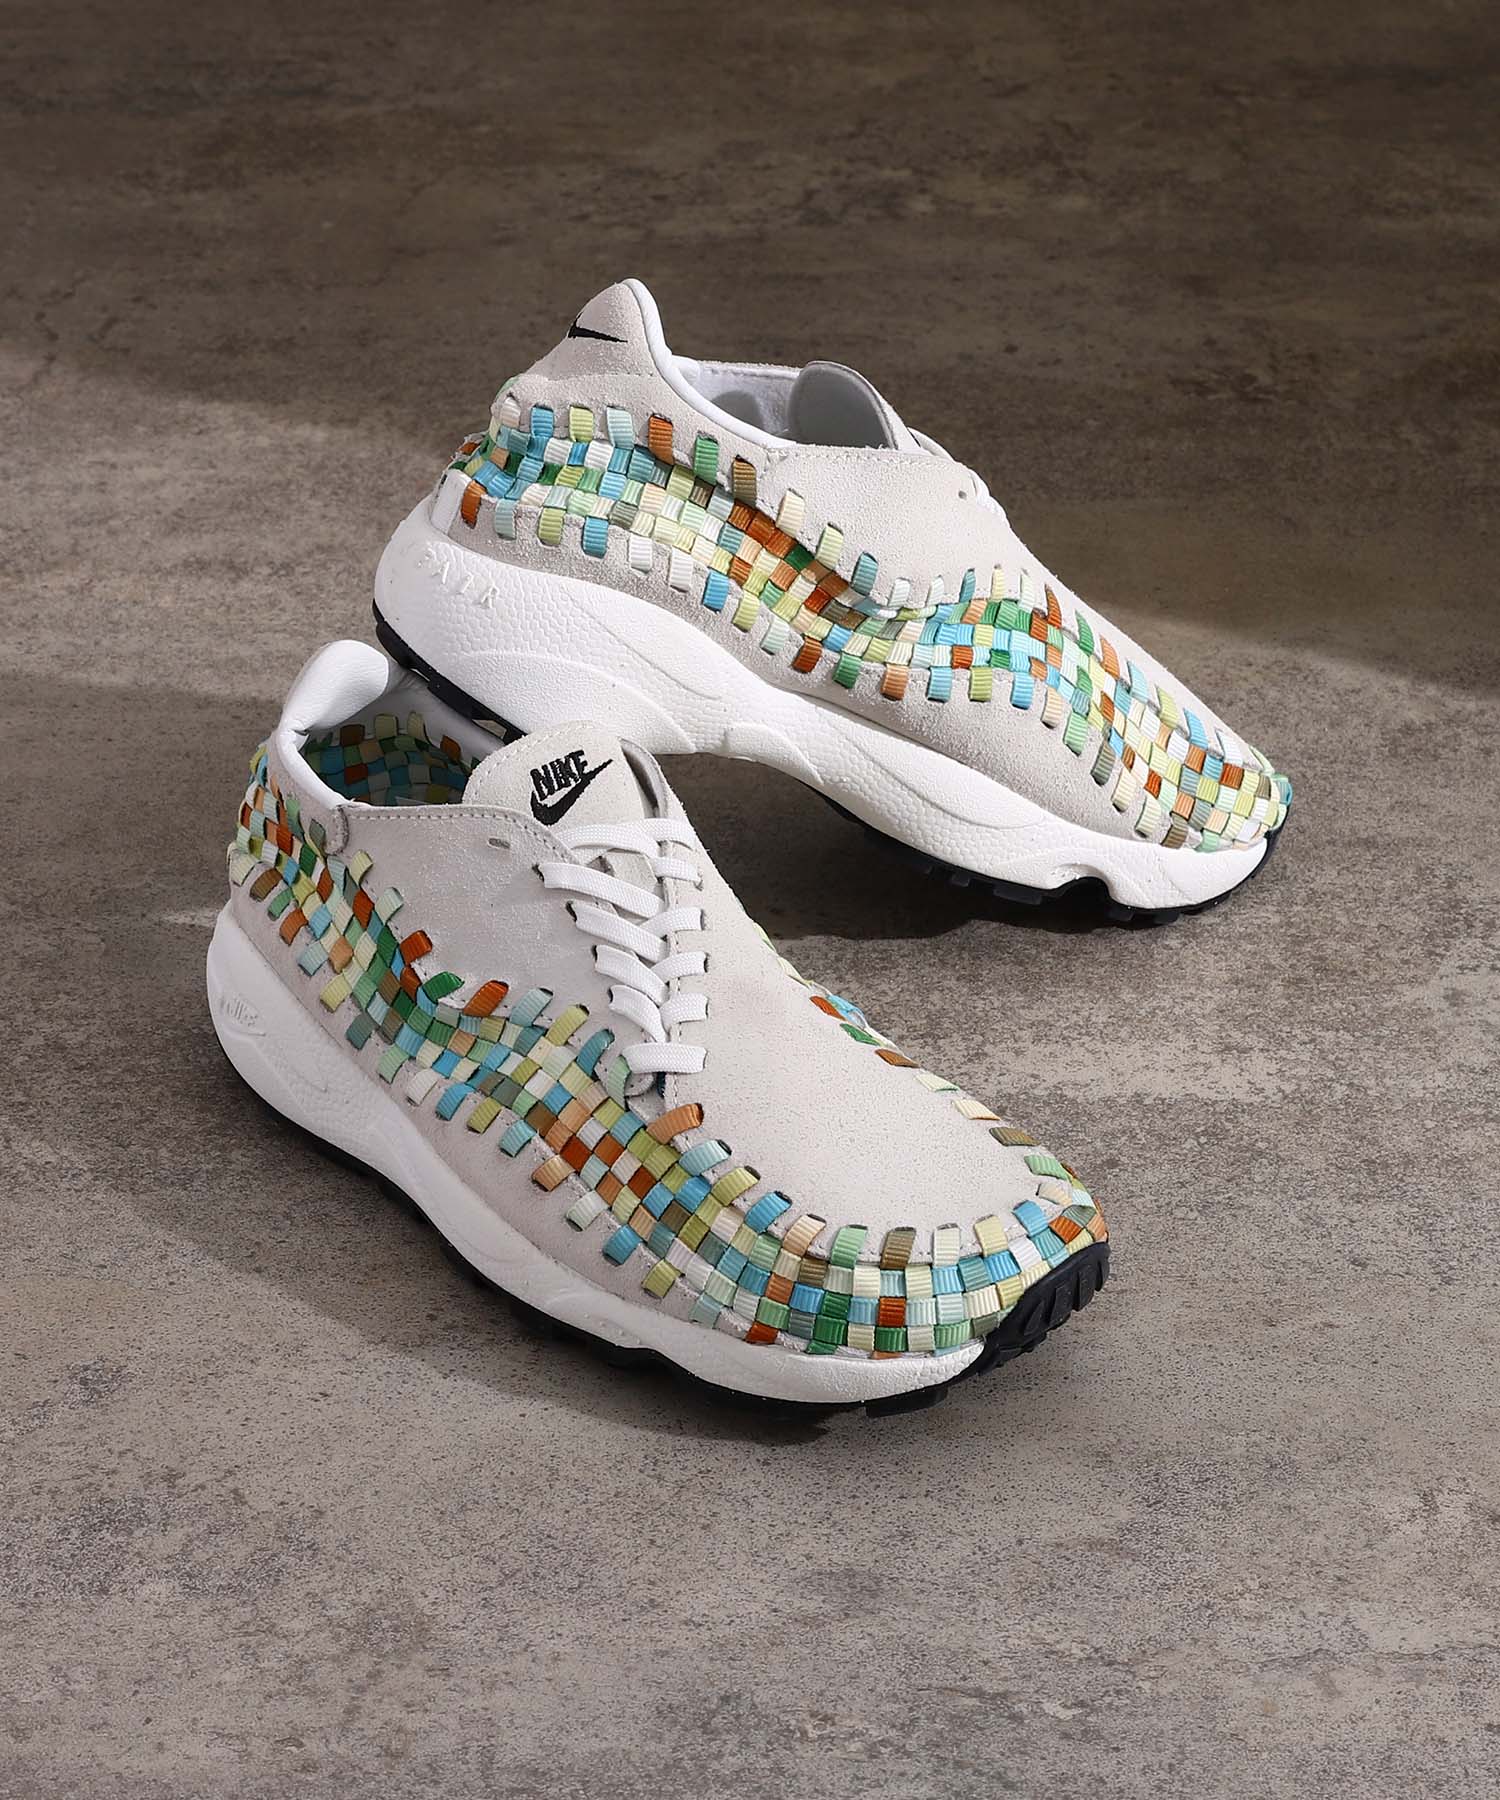 Nike Wmns Air Footscape Woven - FB1959-101